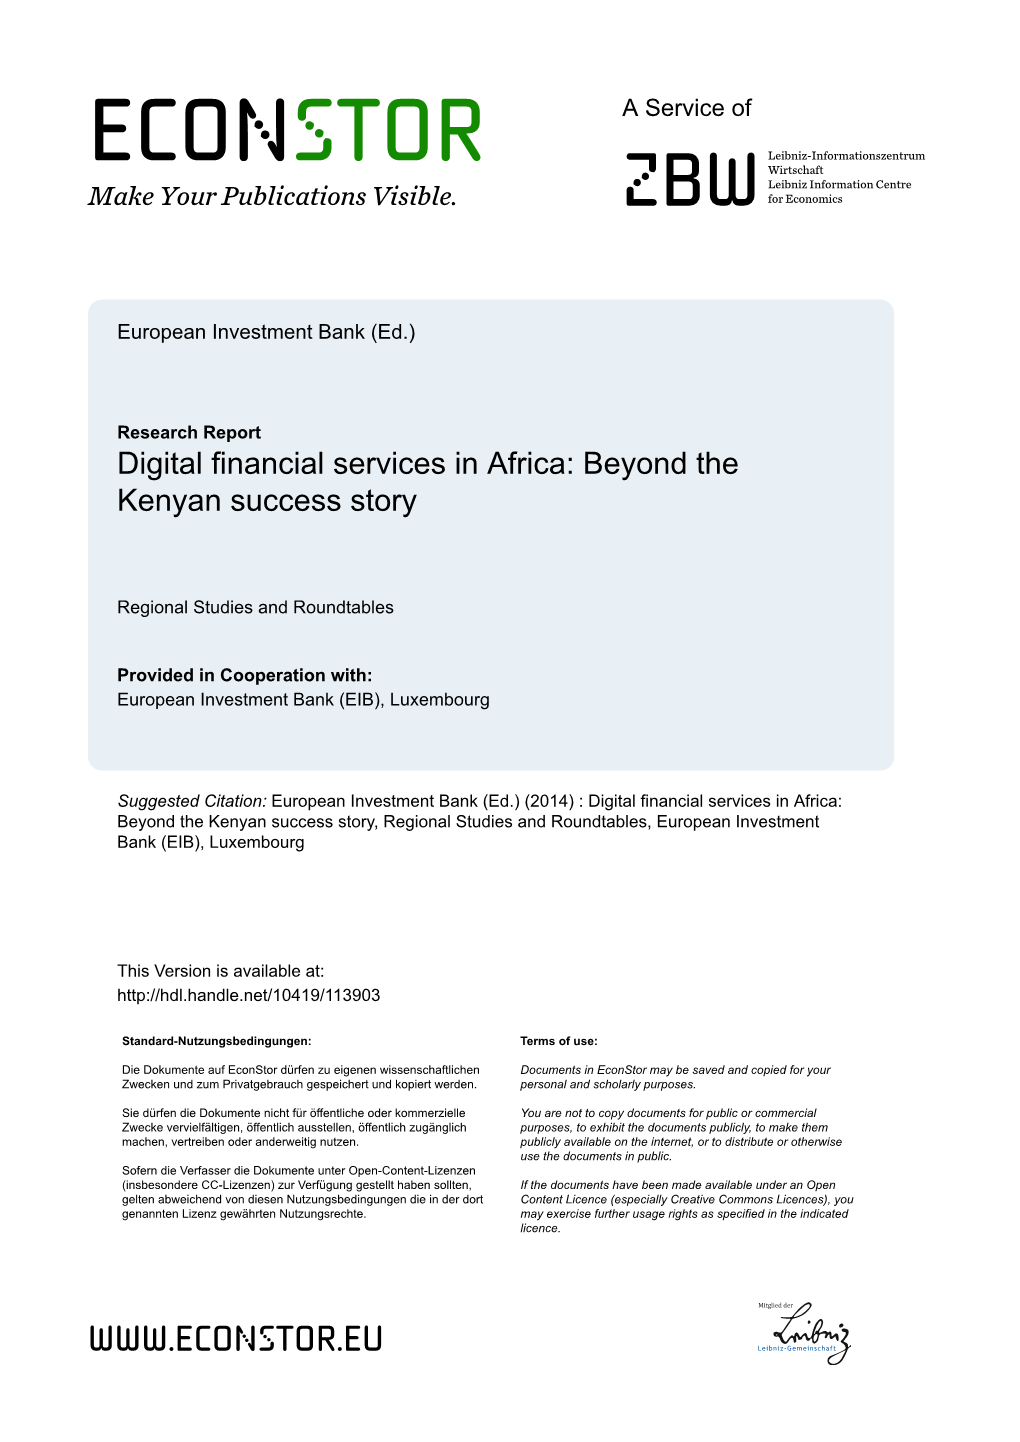 Digital Financial Services in Africa: Beyond the Kenyan Success Story